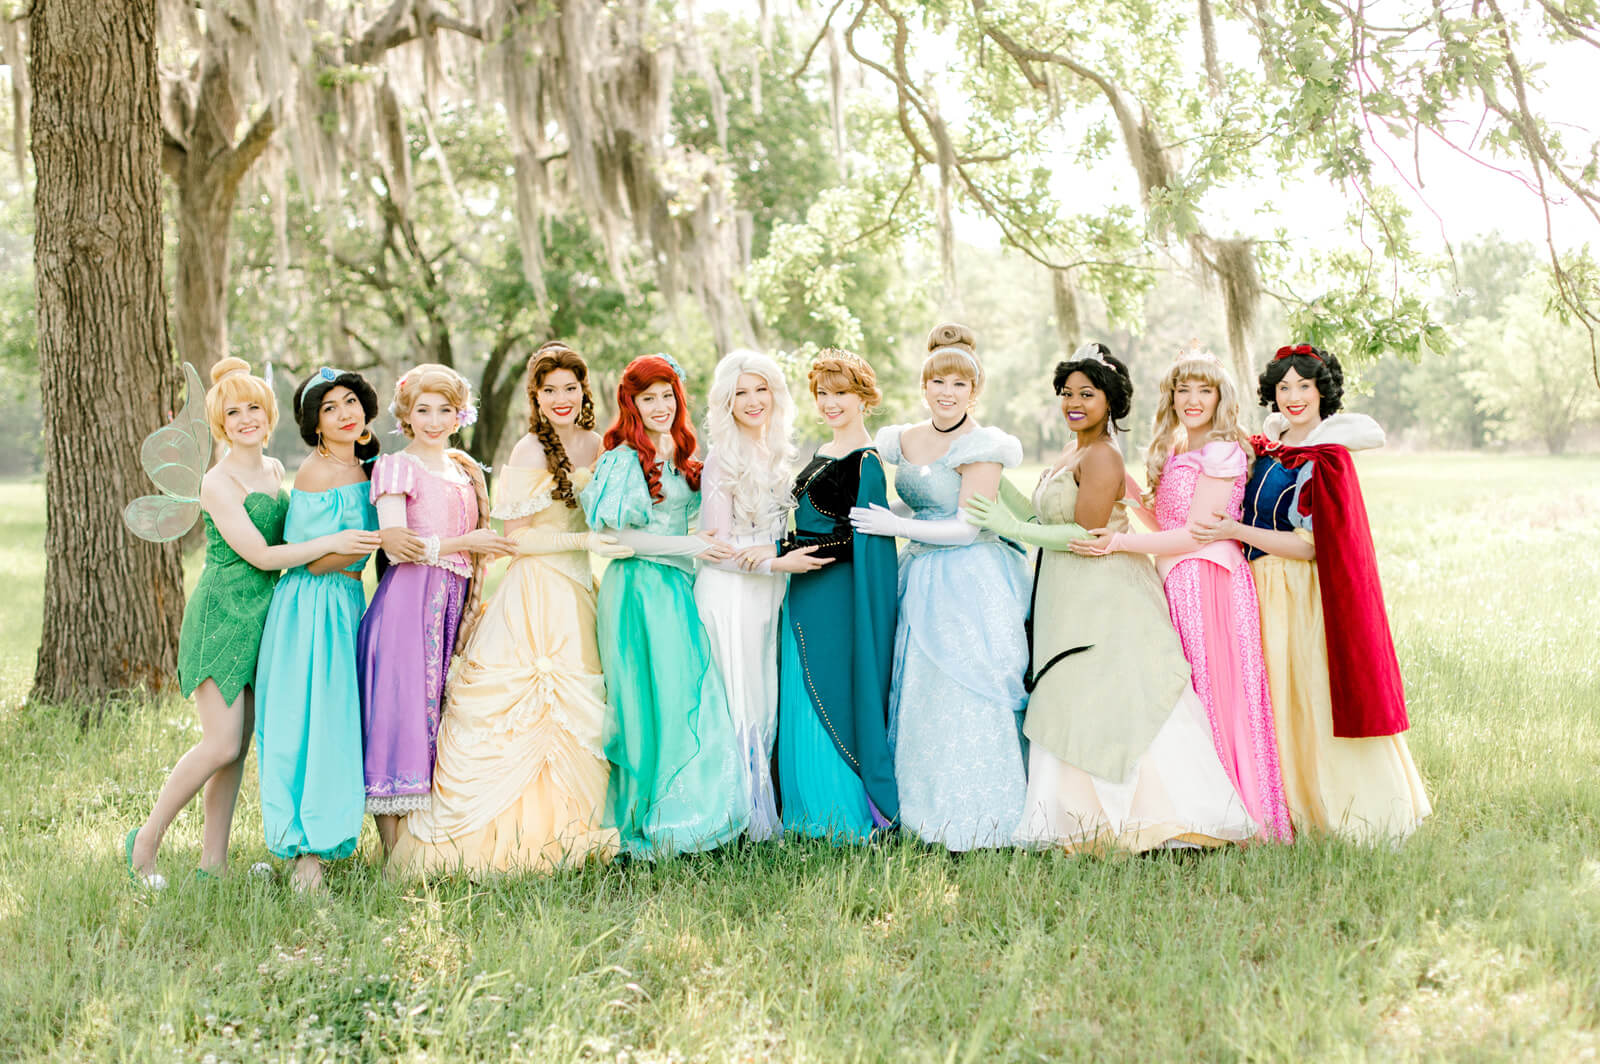 princess parties in houston, fairest of all parties characters